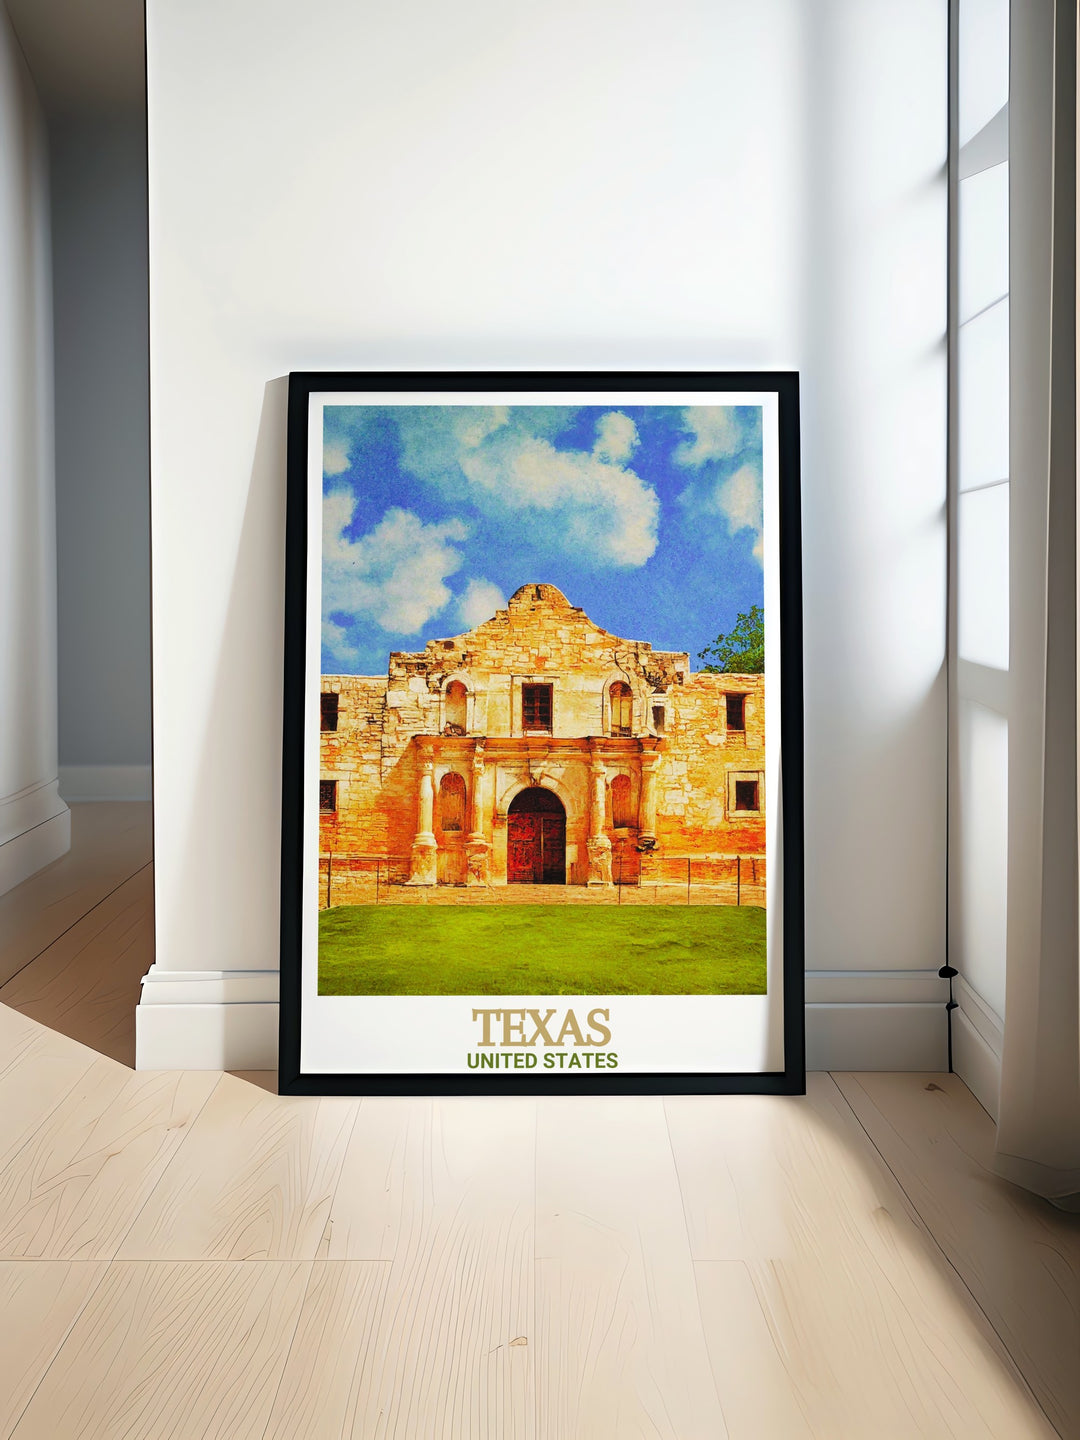 Guadalupe Mountains National Park Poster featuring El Capitan and Guadalupe Peak Texas. Perfect for your home decor. This vibrant print showcases the natural beauty of Guadalupe Texas USA and includes stunning details from The Alamo.